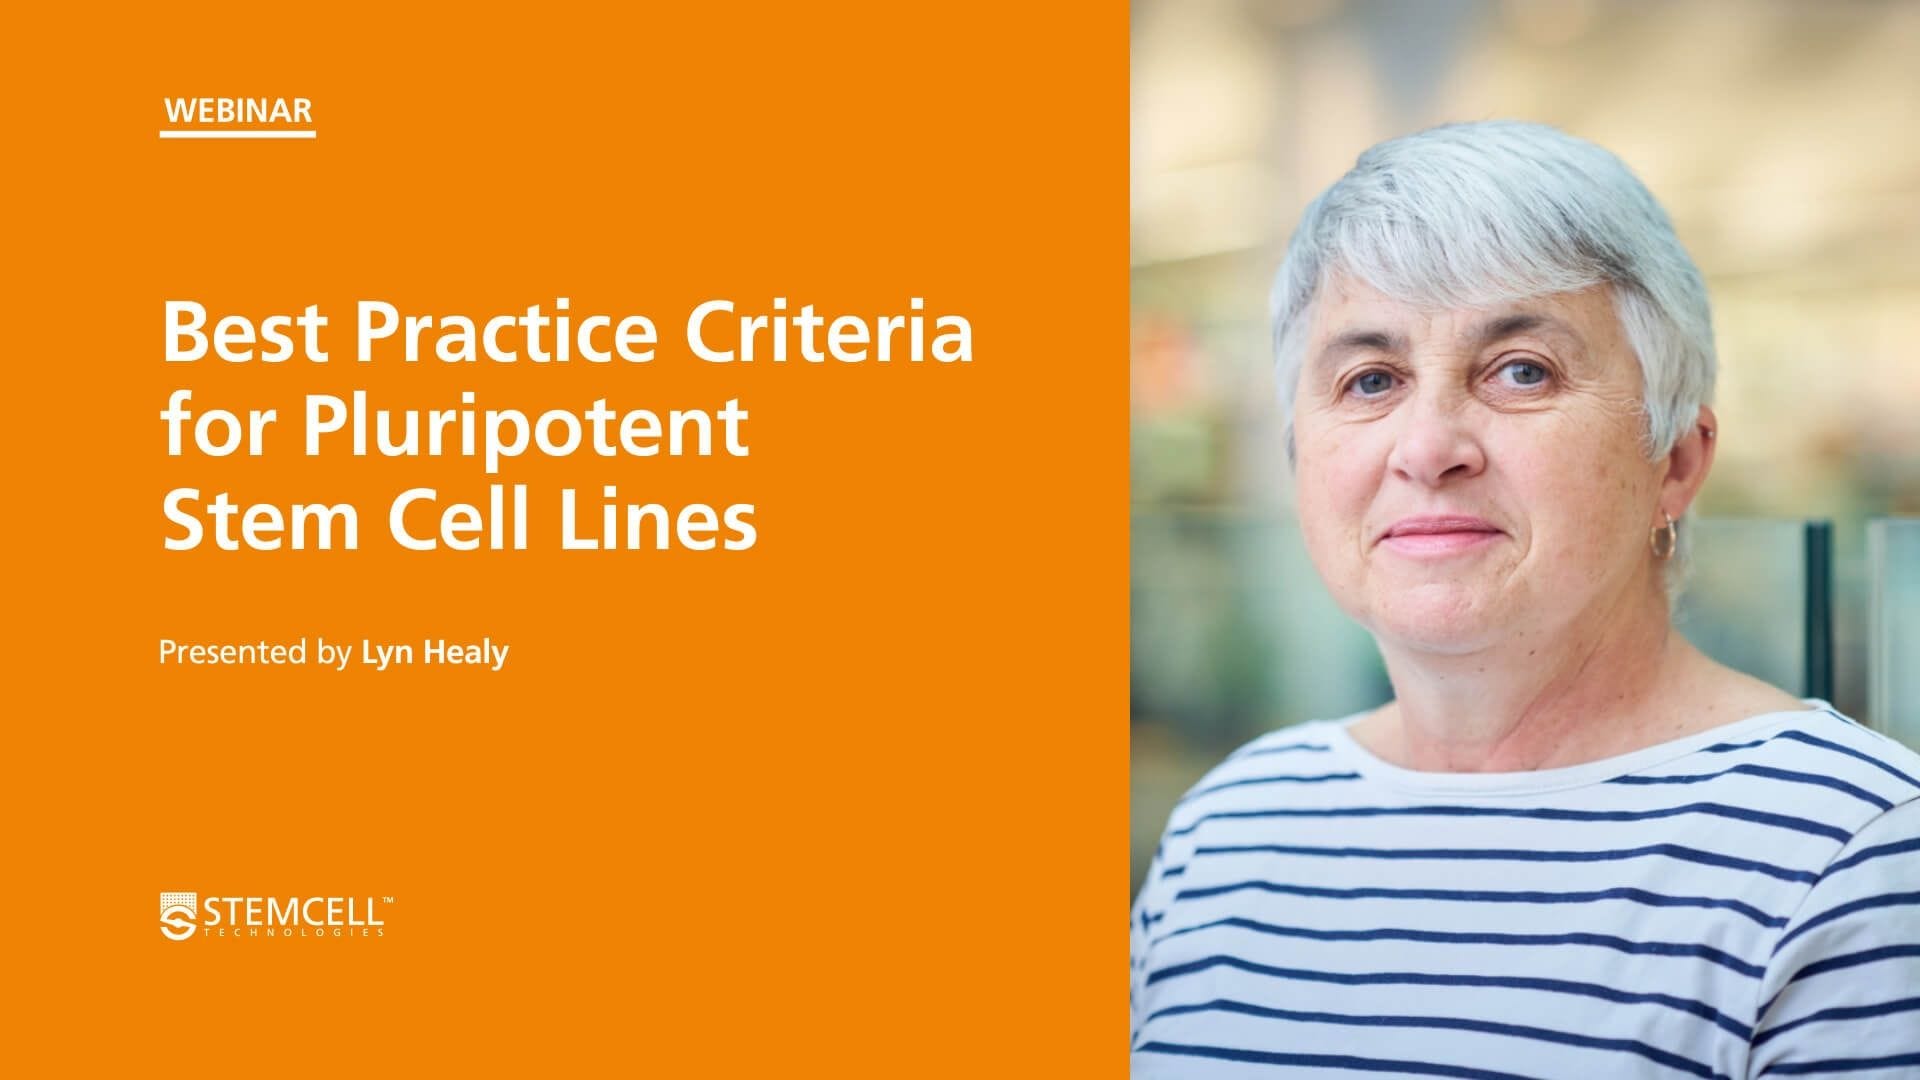 Best Practice Criteria for Pluripotent Stem Cell Lines